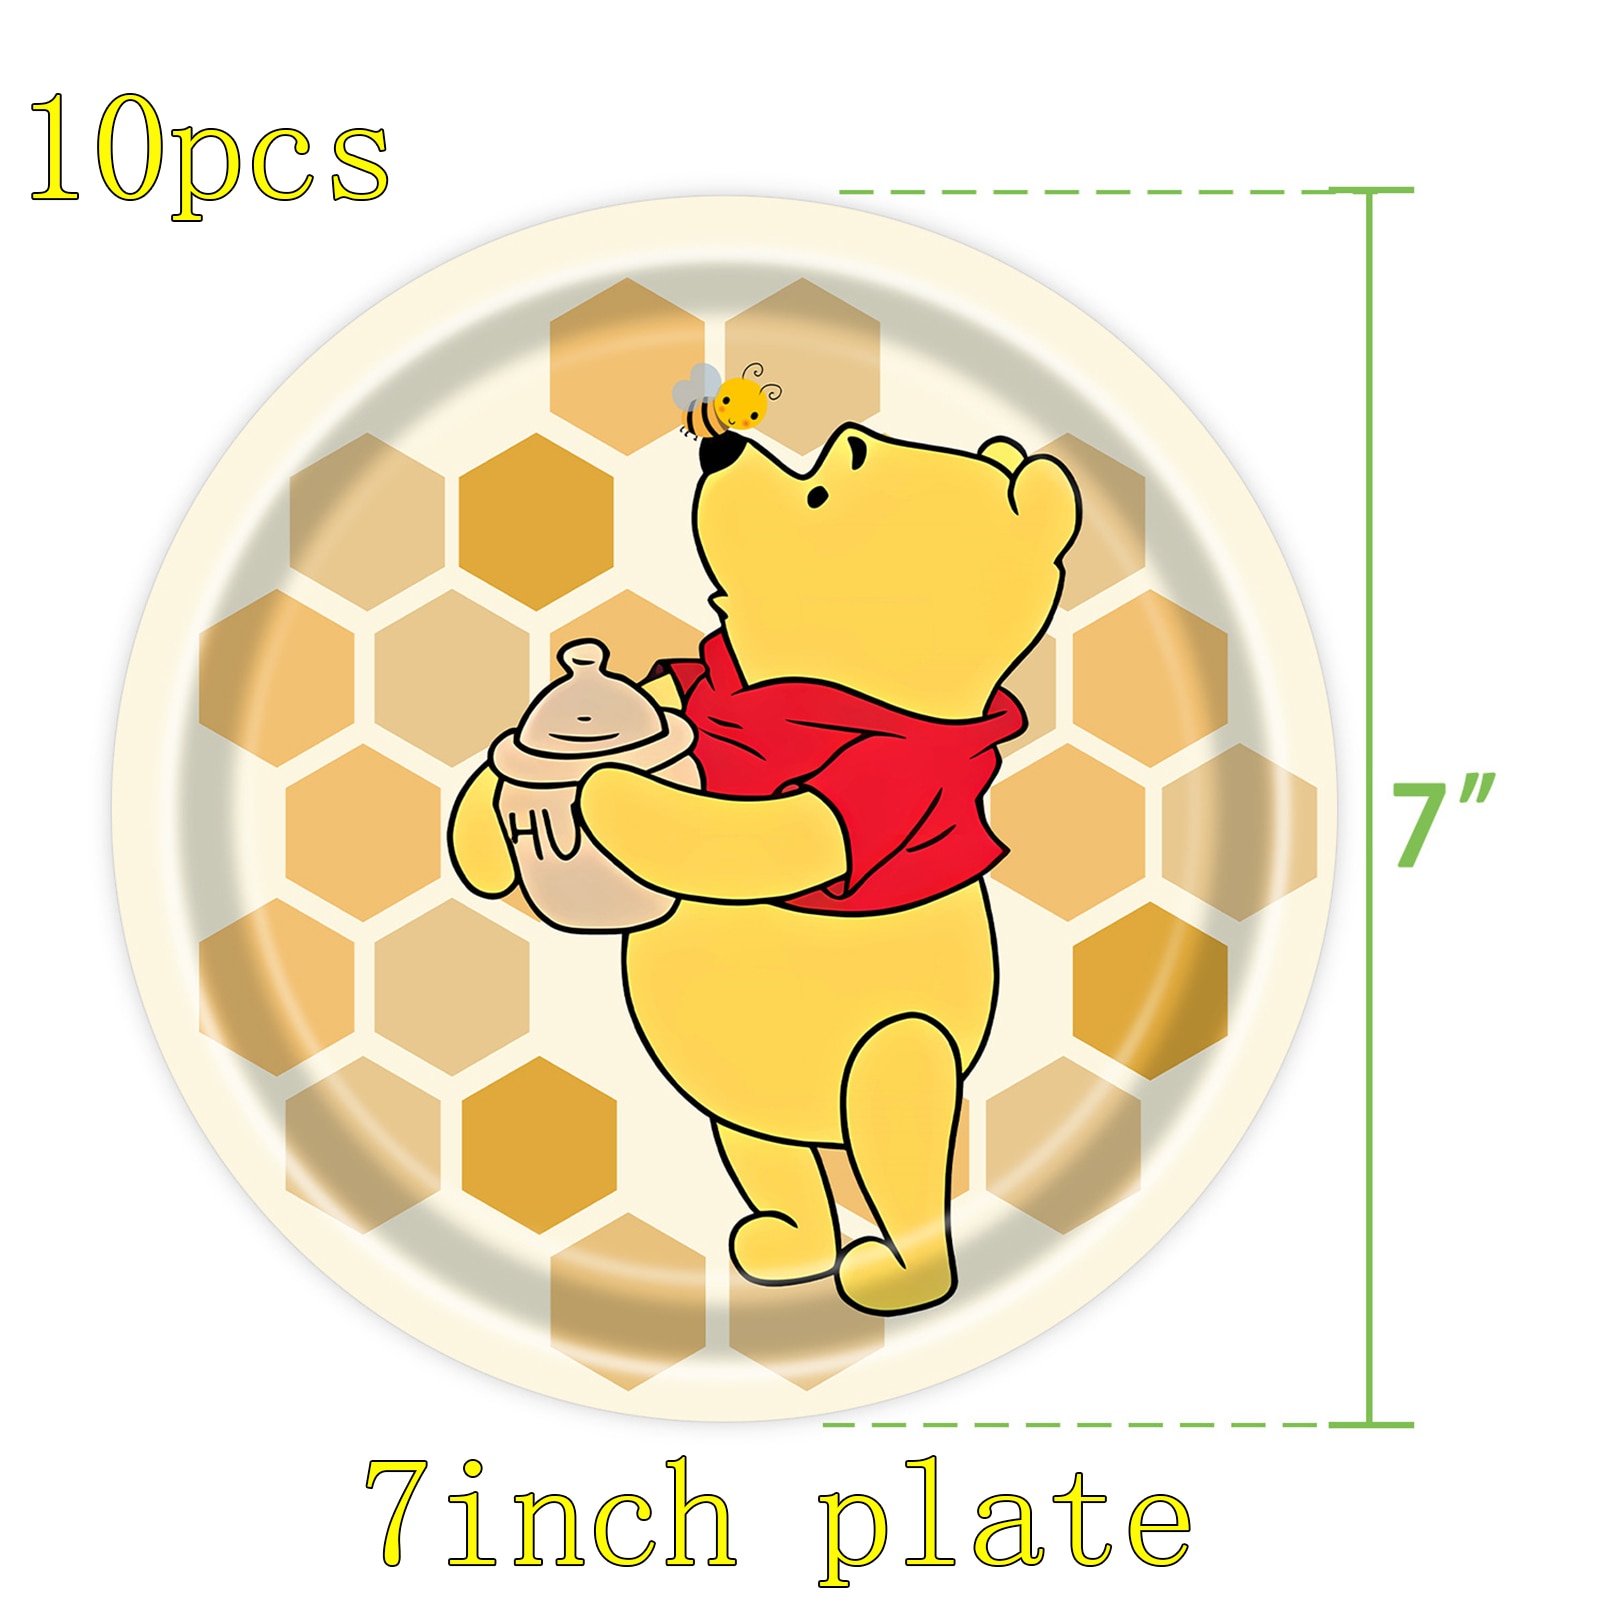 Winnie The Pooh Birthday Party Decorations Serves 10 Guests Plates Napkins Table Cover Balloons Banner For 3 - Winnie The Pooh Plush